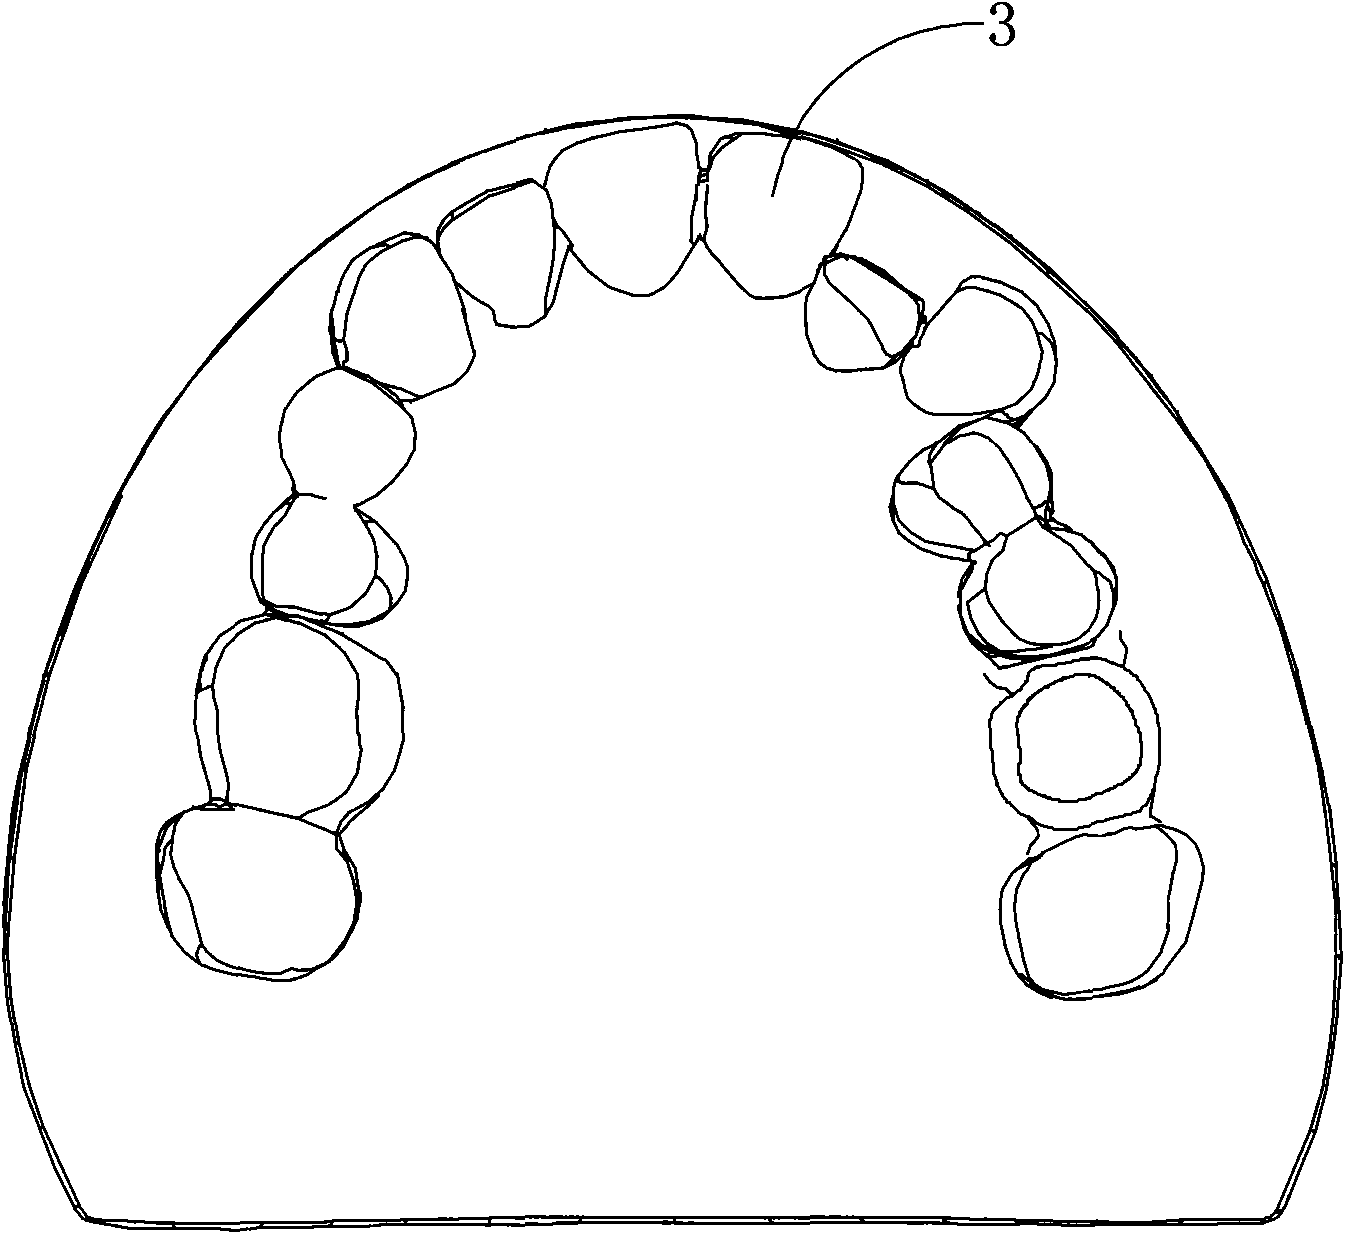 Tooth extracting model